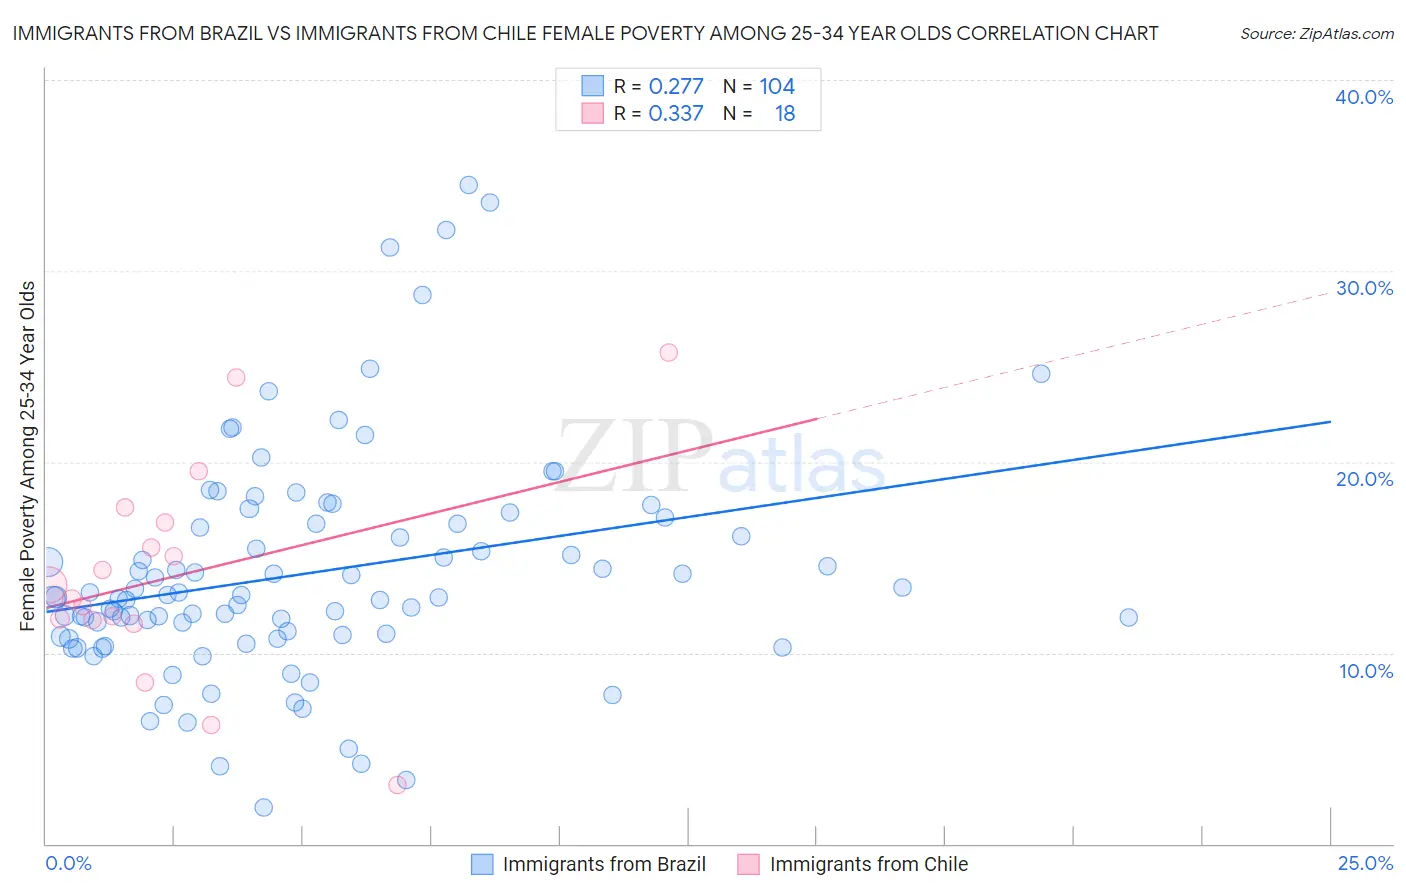 Immigrants from Brazil vs Immigrants from Chile Female Poverty Among 25-34 Year Olds